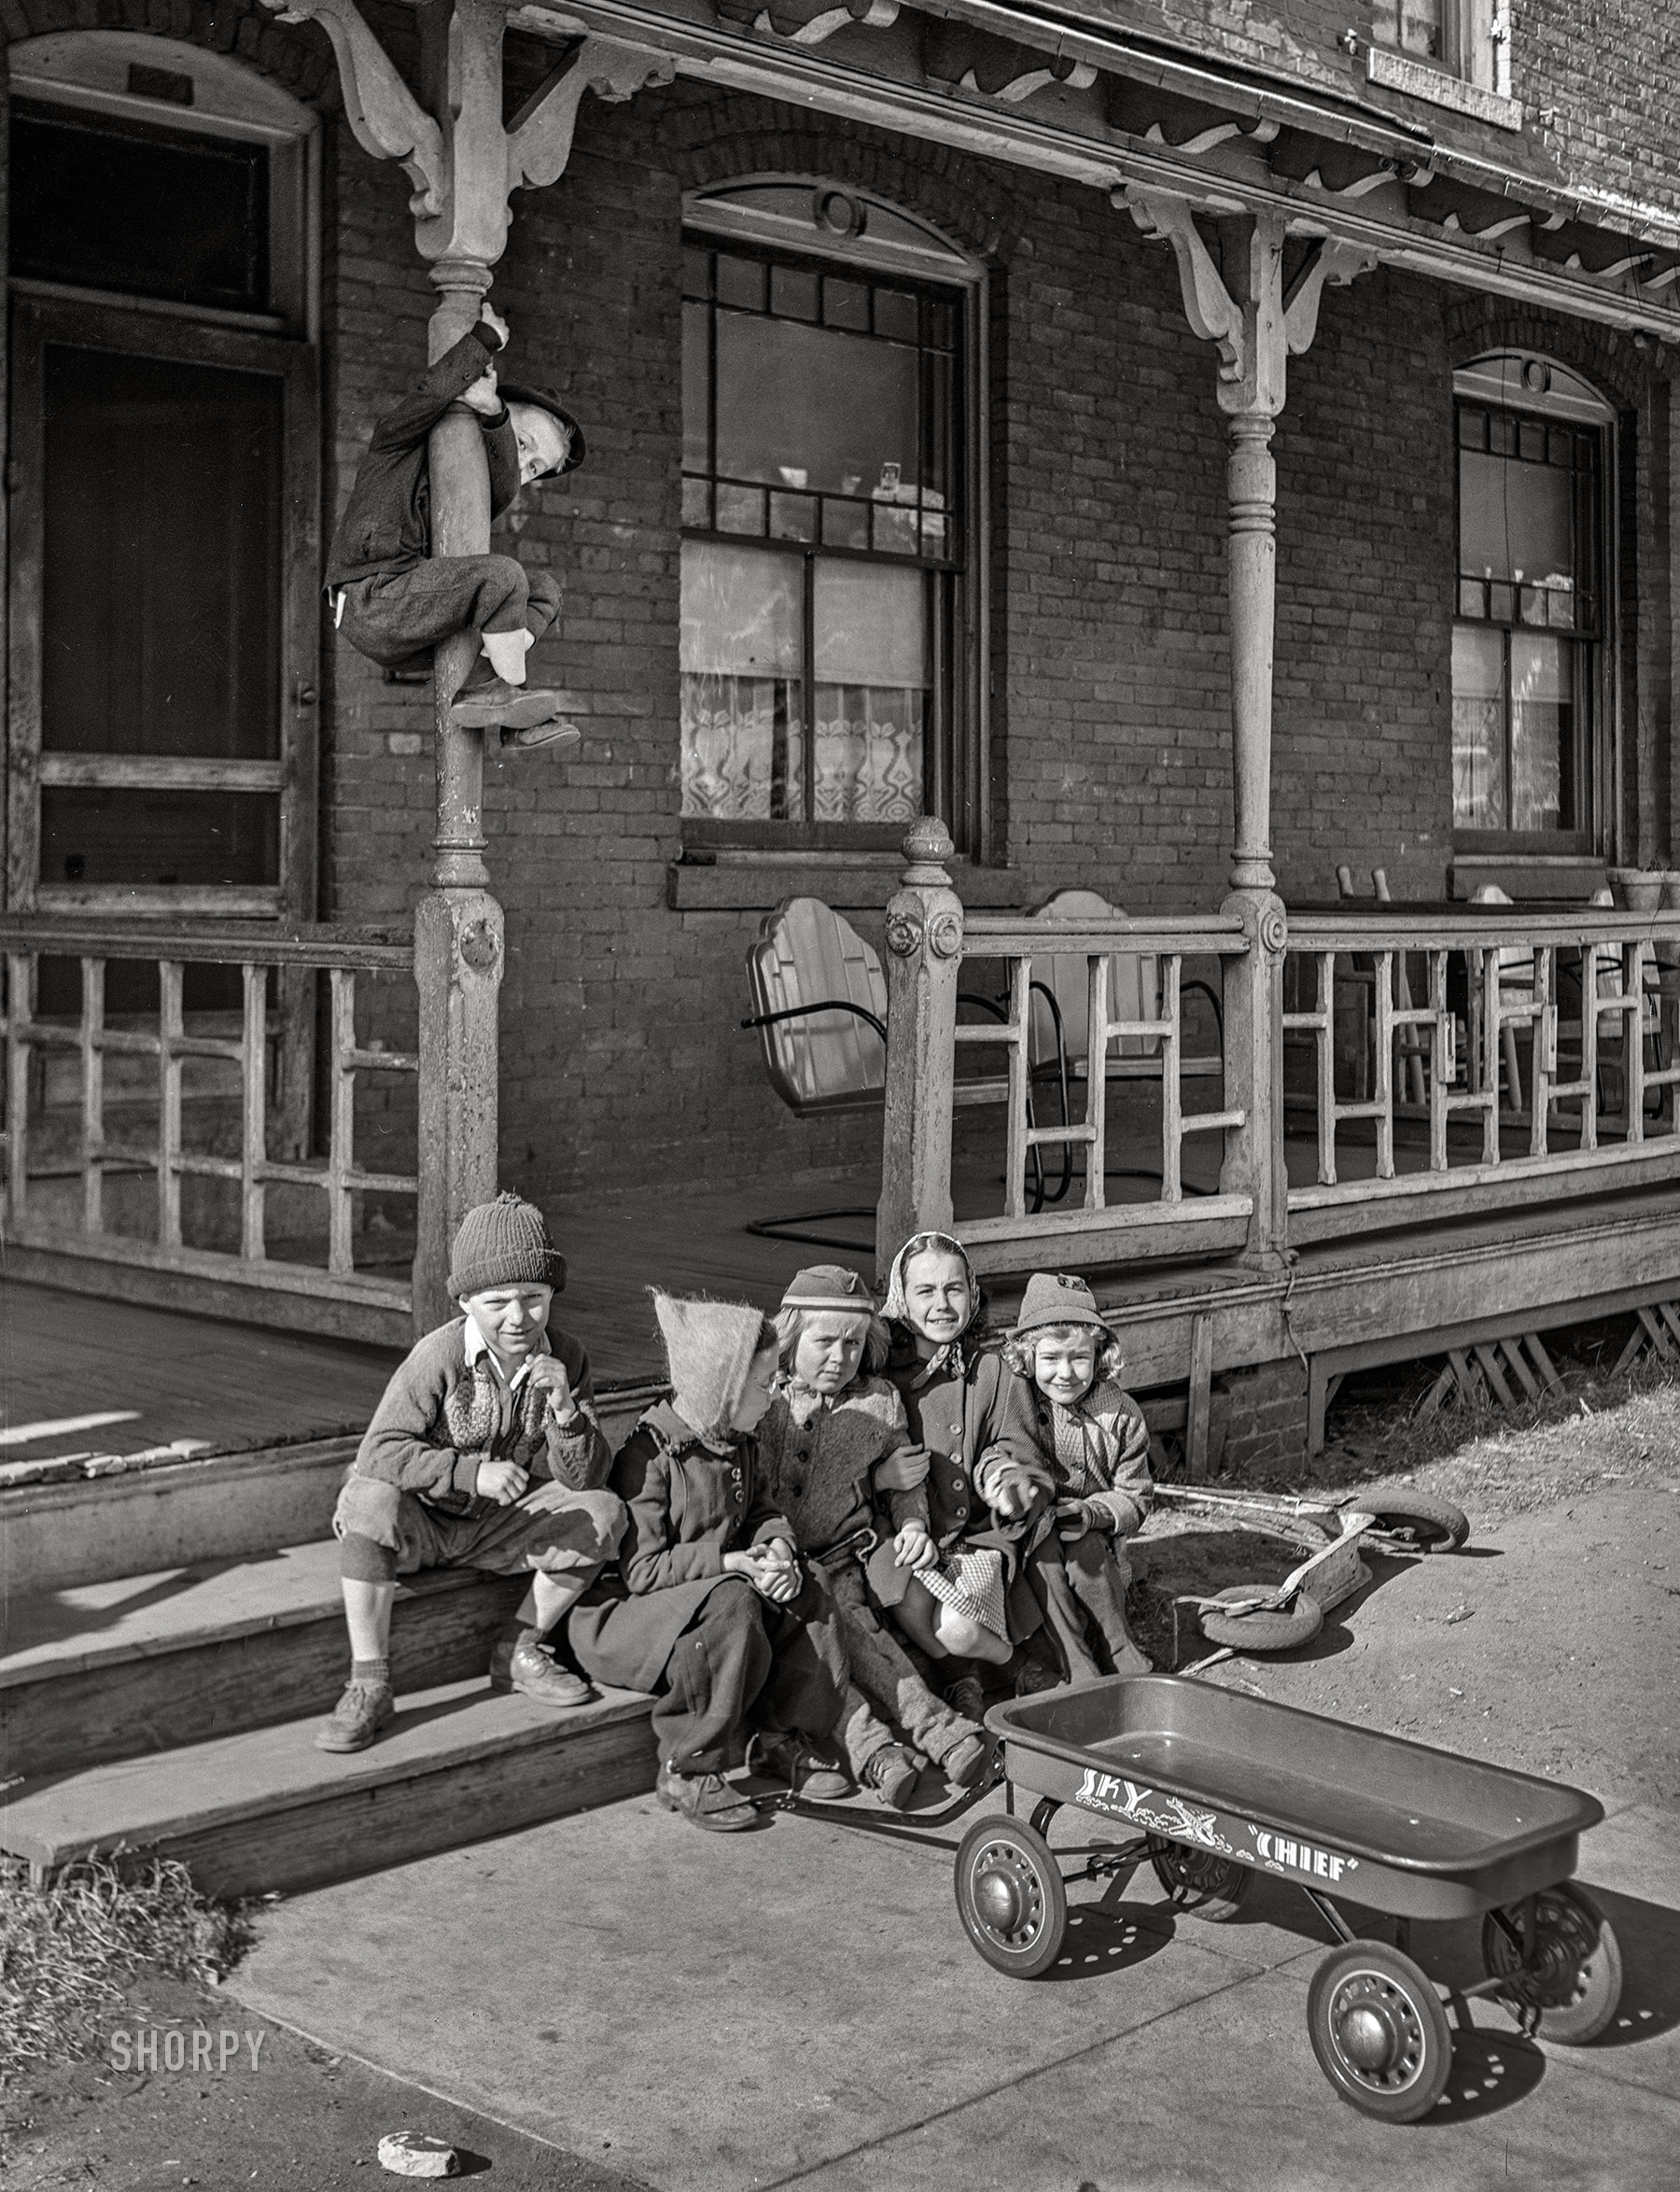 March 1941. "Boy from North Carolina. Family has just moved to Newport News, Virginia, for work in shipyards." Medium format acetate negative by John Vachon. View full size.